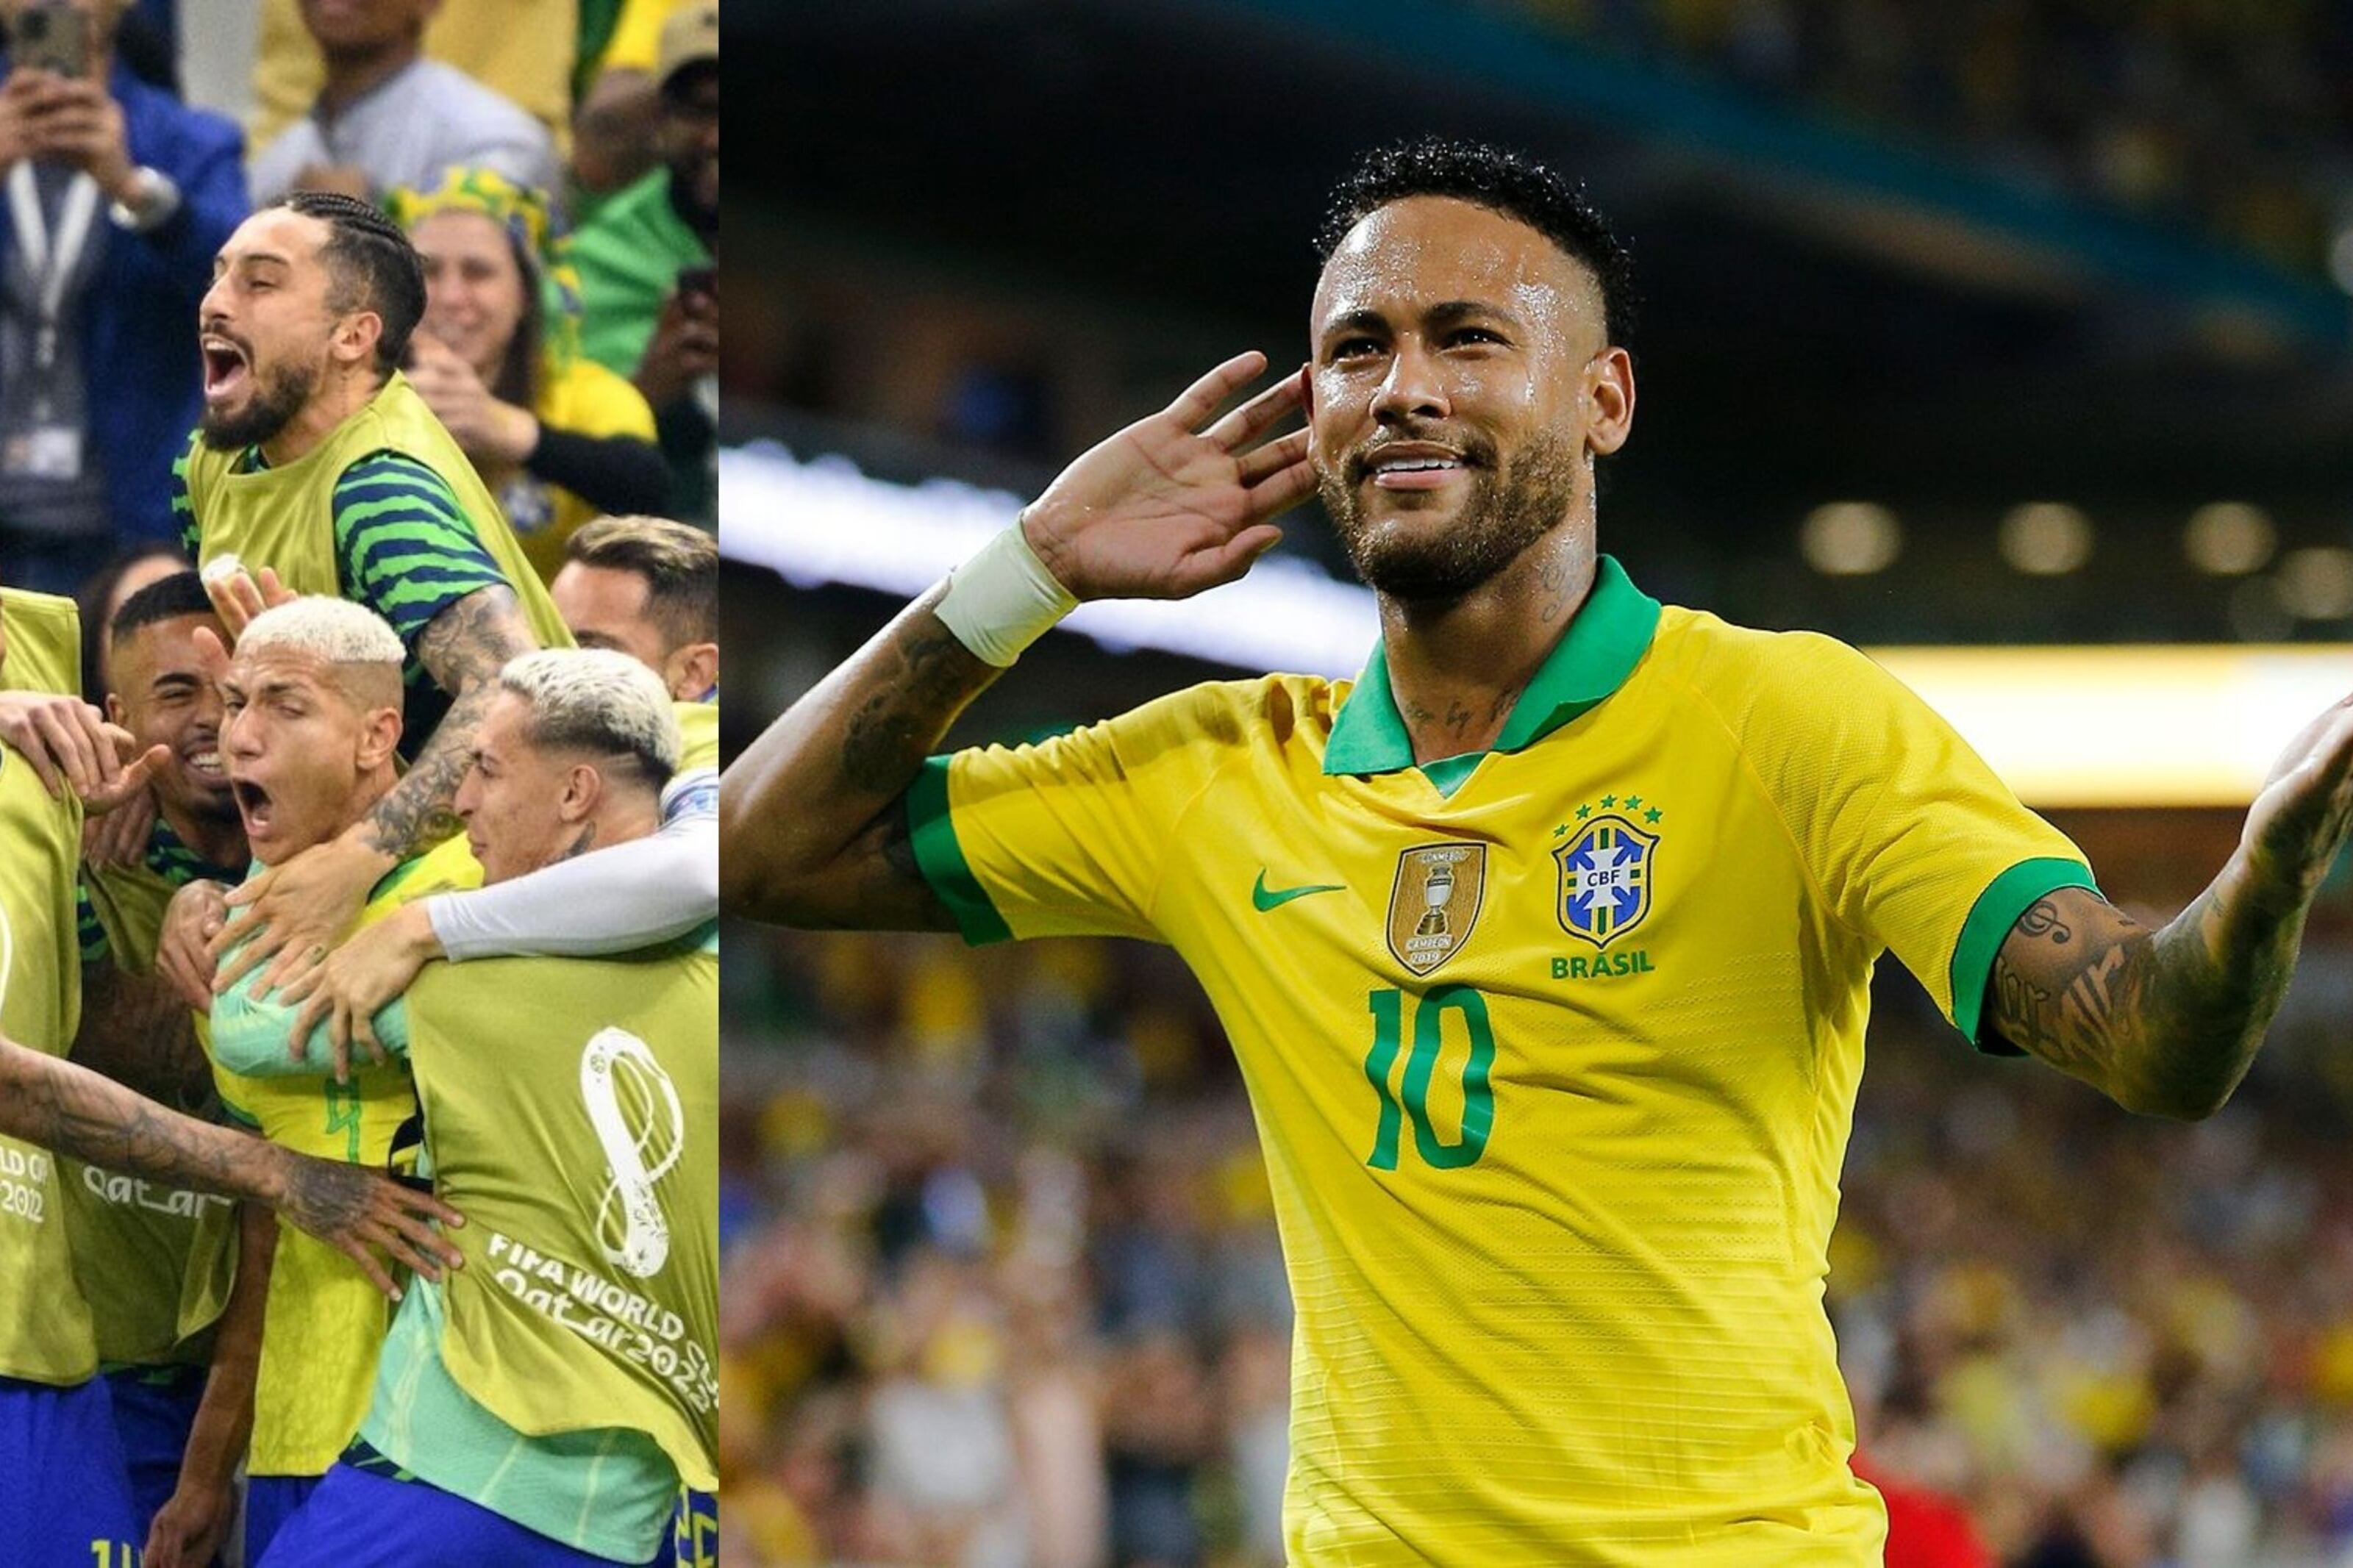 Not Neymar, he's Brazil's hero in Qatar 2022 and the fans give him an unusual nickname